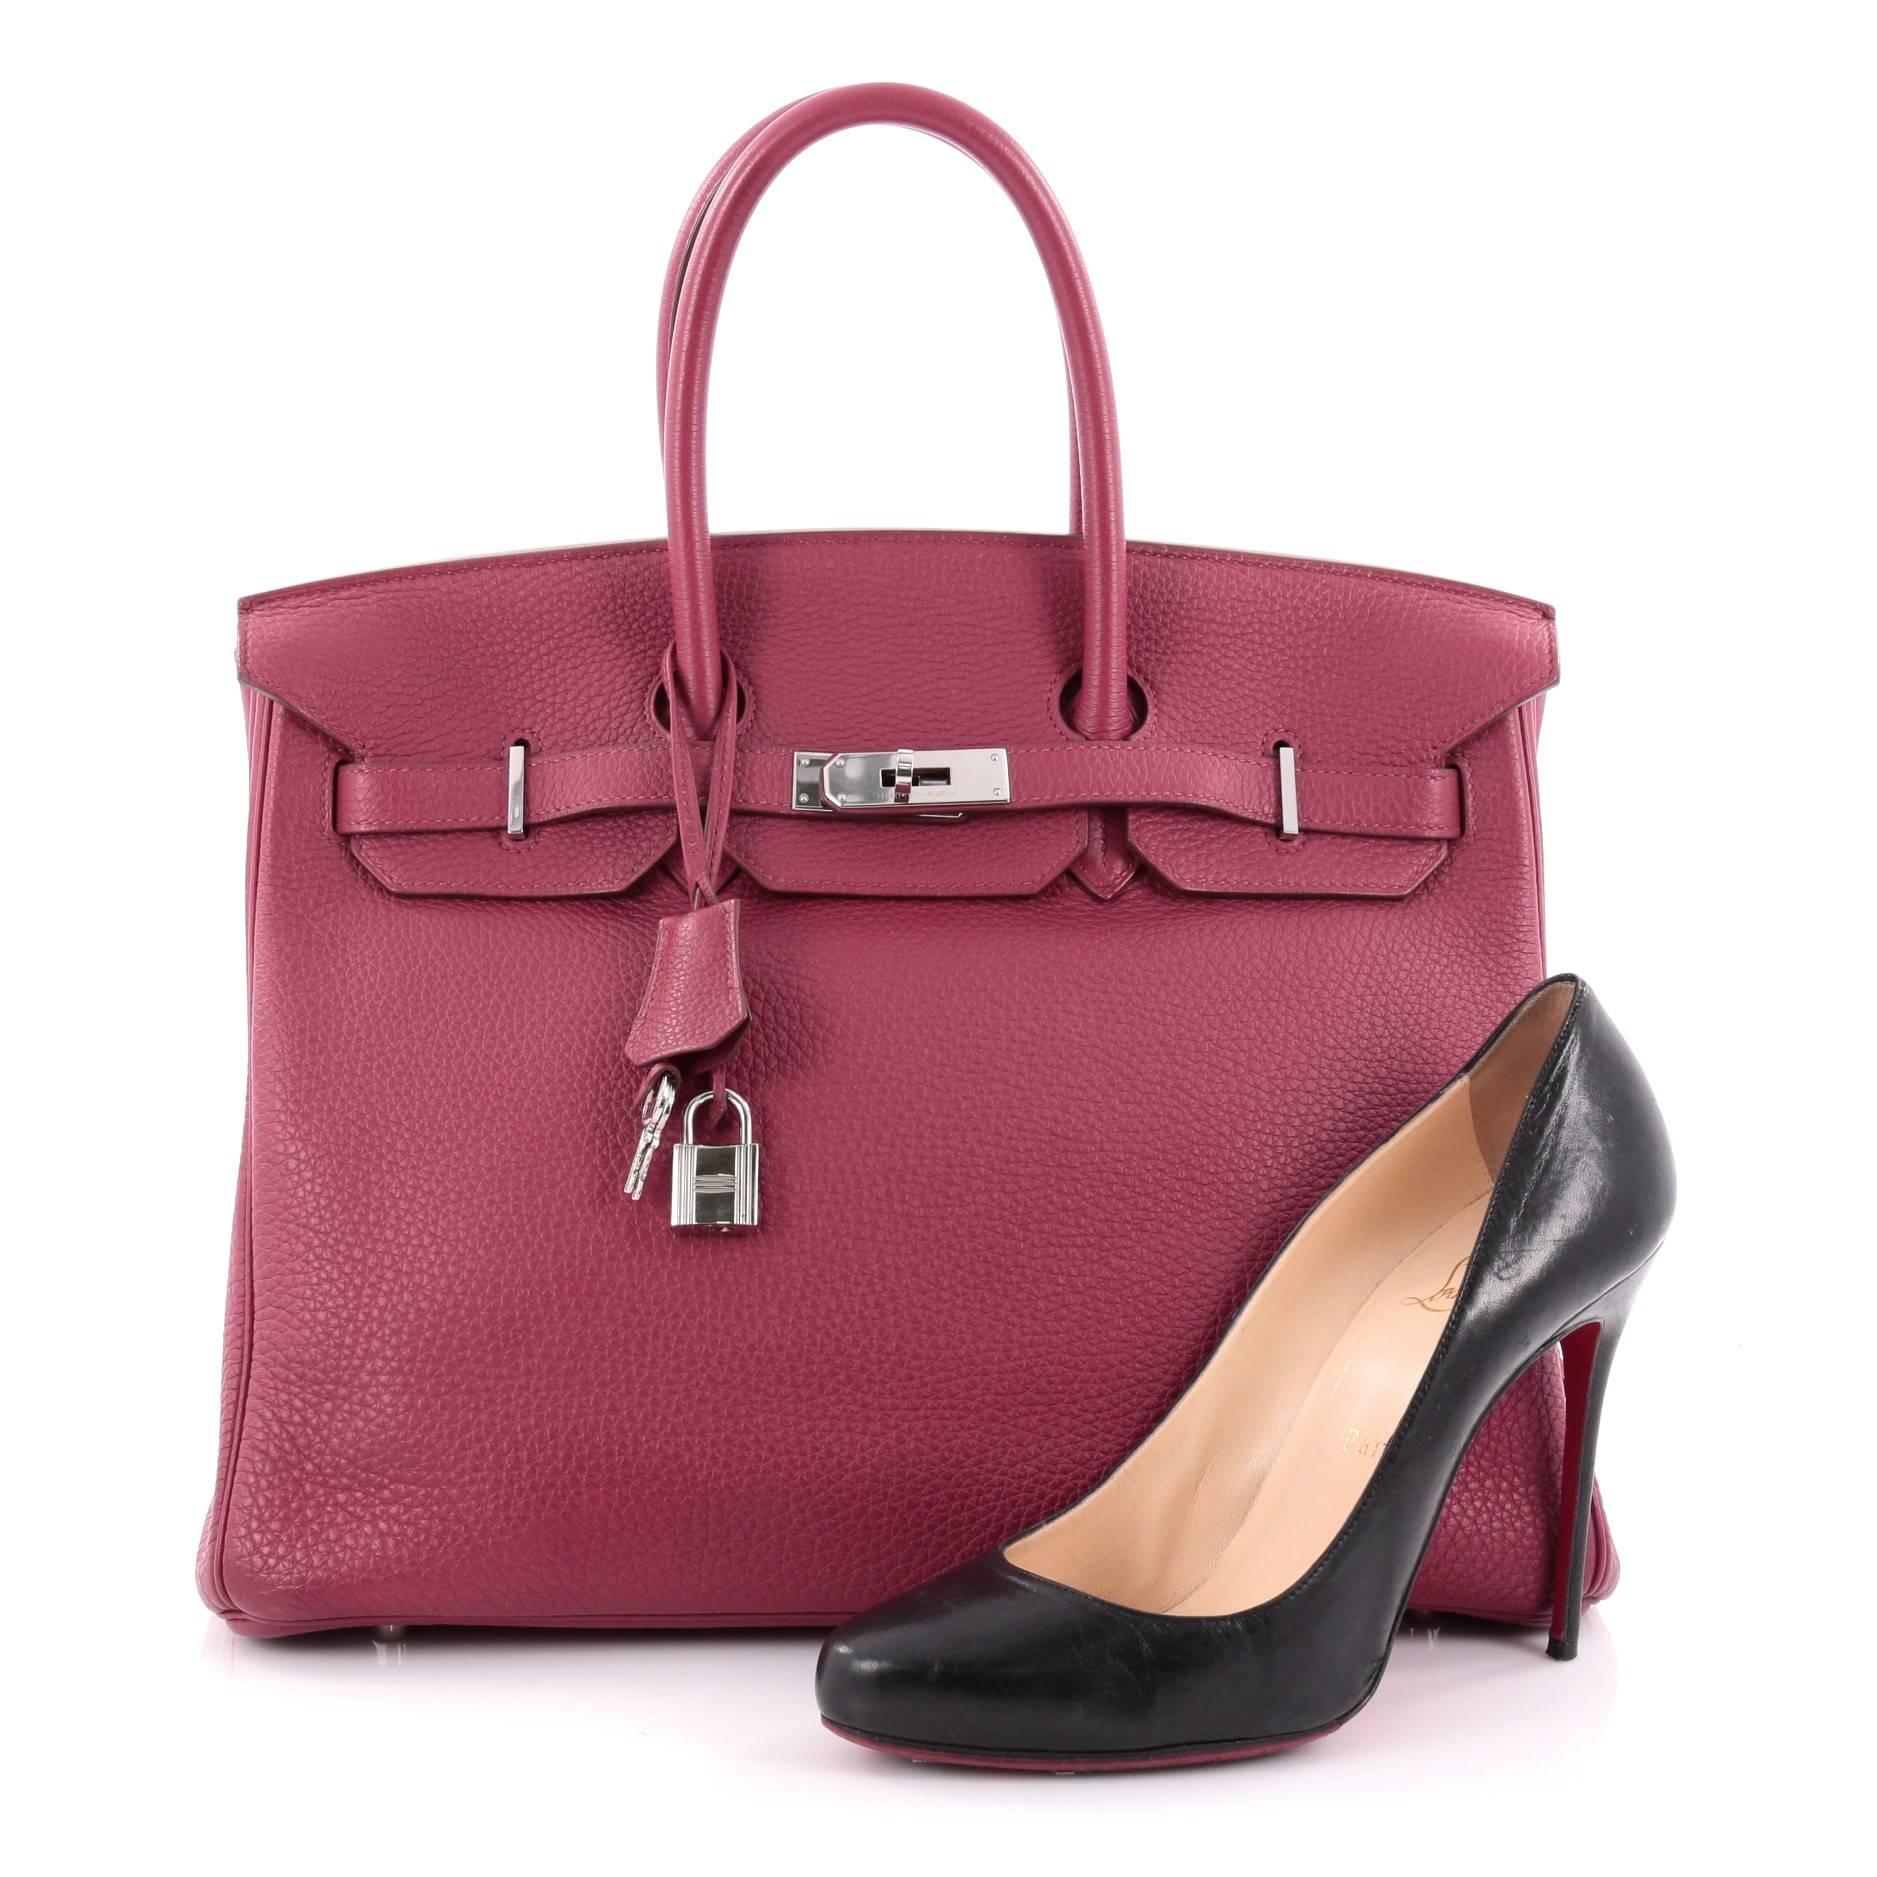 This authentic Hermes Birkin Handbag Rubis Clemence with Palladium Hardware 35 is synonymous to traditional Hermes luxury. Crafted with sturdy, scratch-resistant rubis red clemence leather, this eye-catching luxurious tote is accented with polished